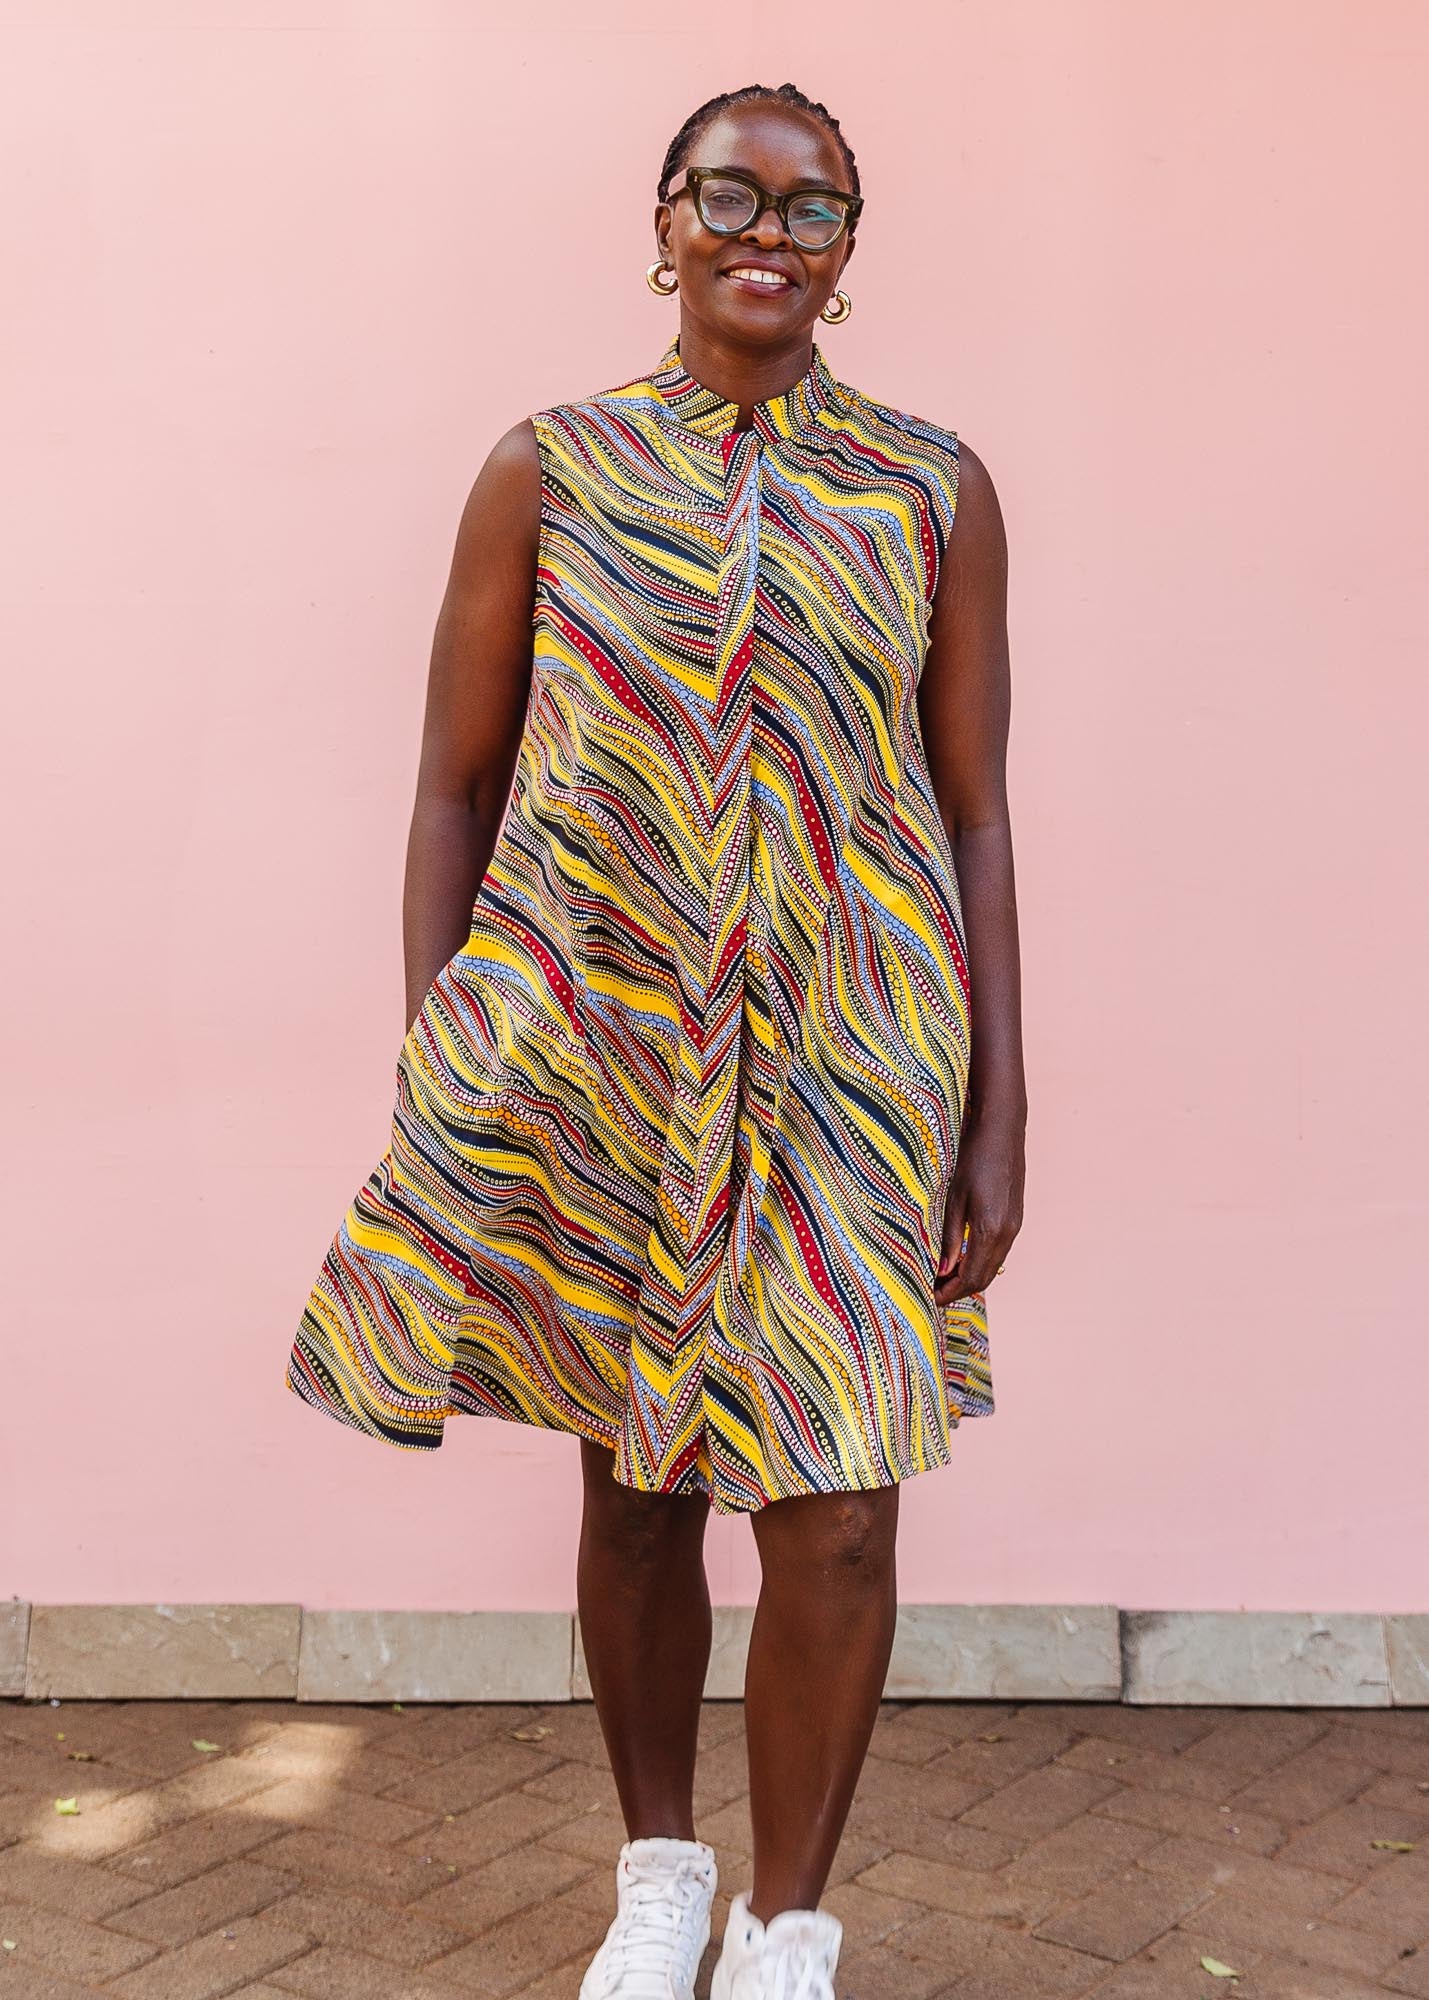 The model is wearing multi-colored abstract print dress